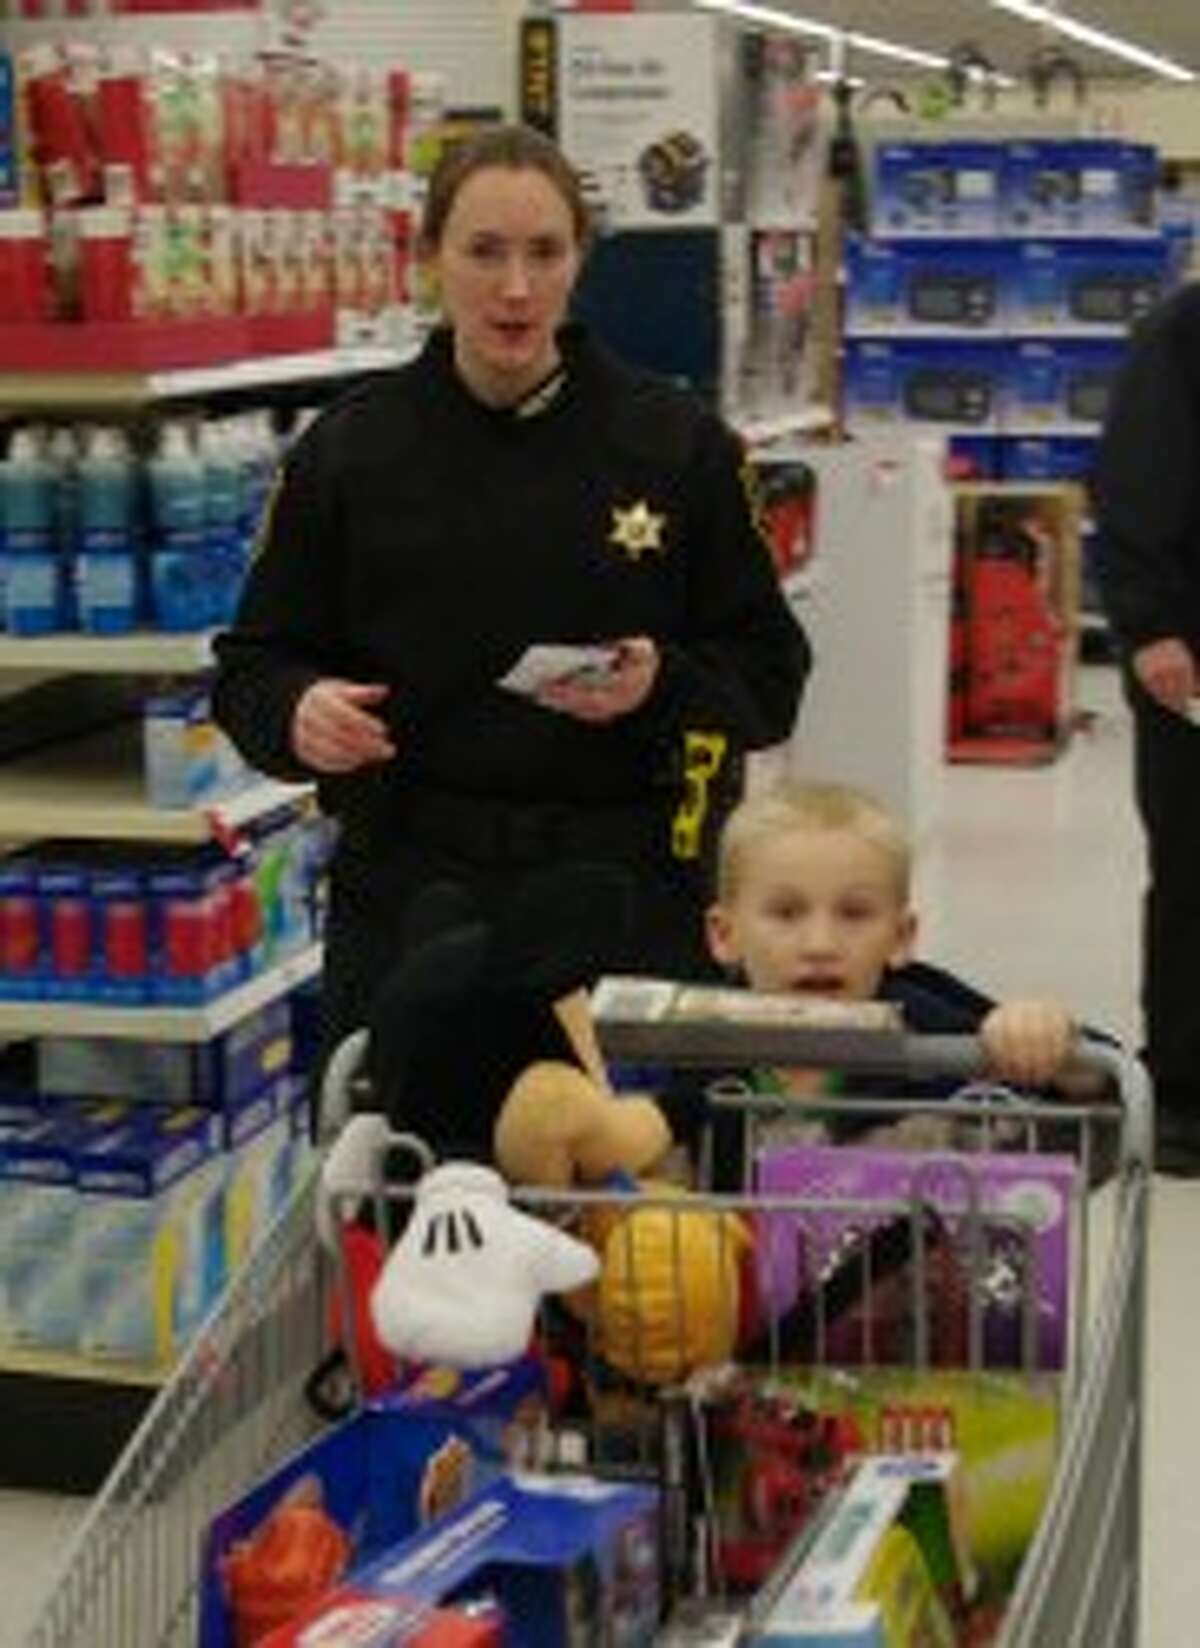 Blake Somsel pushes the cart as Ella Simmons of the Manistee County Sheriff’s Department follows. (Dave Yarnell/News Advocate)